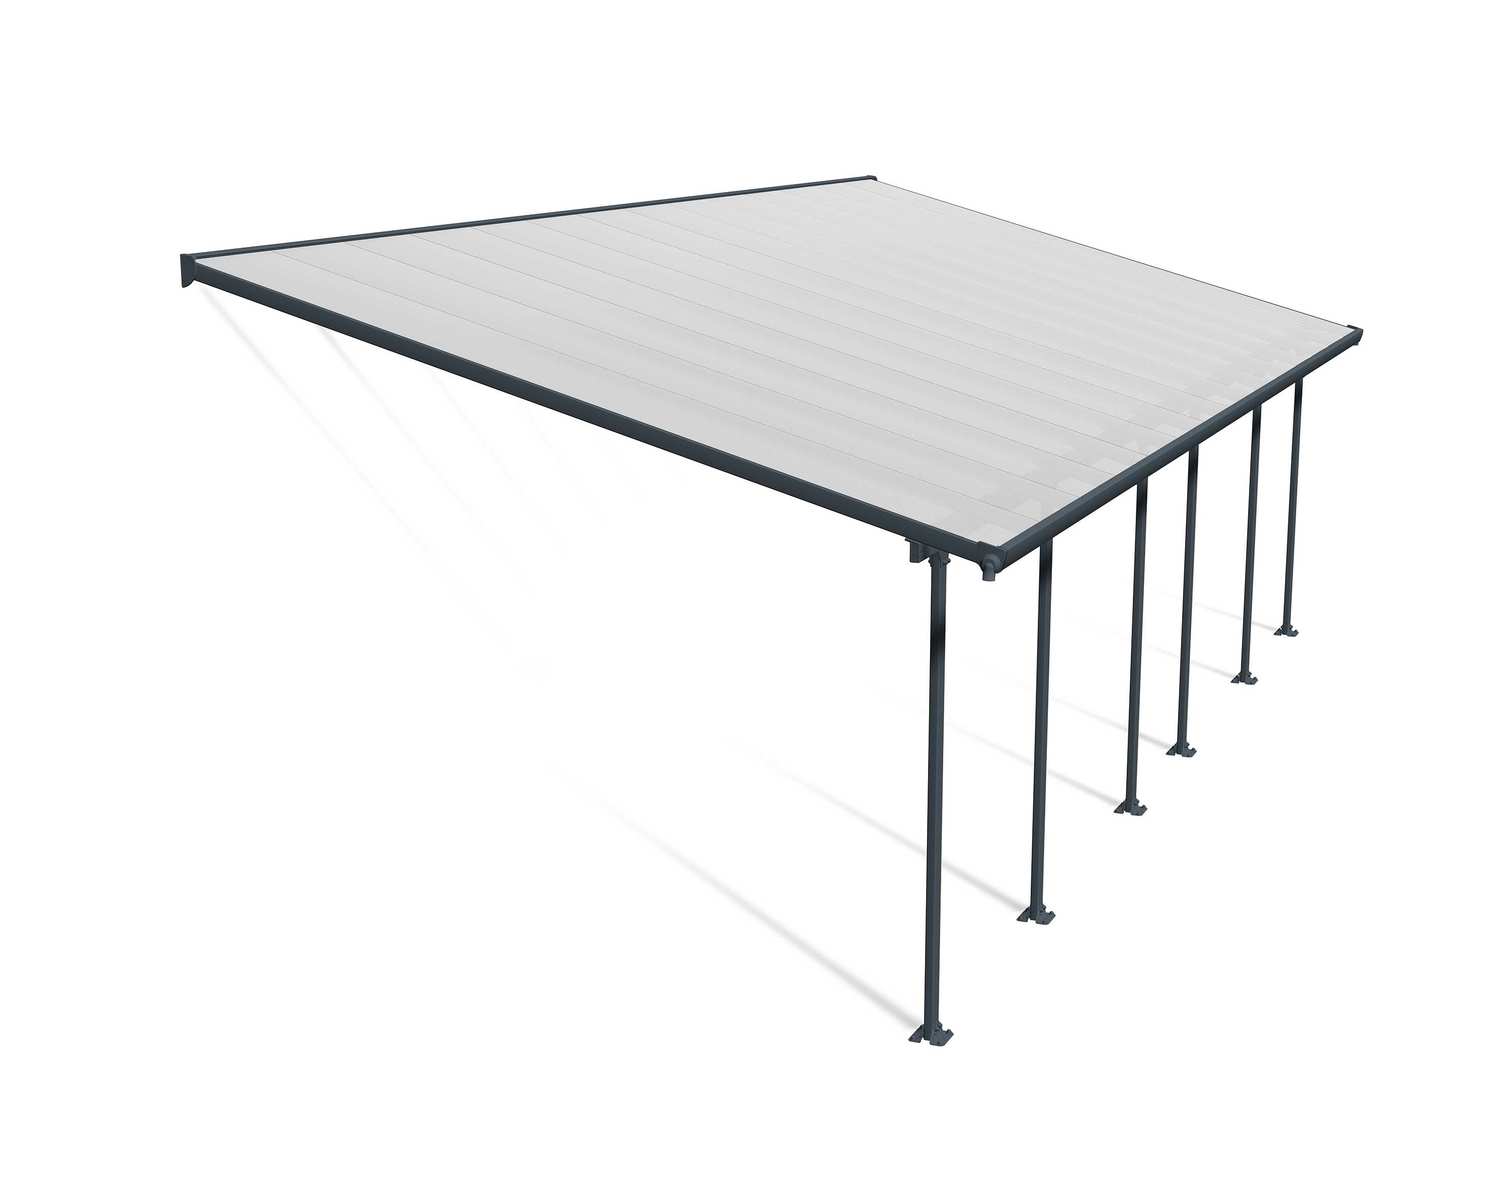 Feria 13 ft. x 28 ft. Grey Aluminium Patio Cover With 6 Posts, Clear Twin-Wall Polycarbonate Roof Panels.